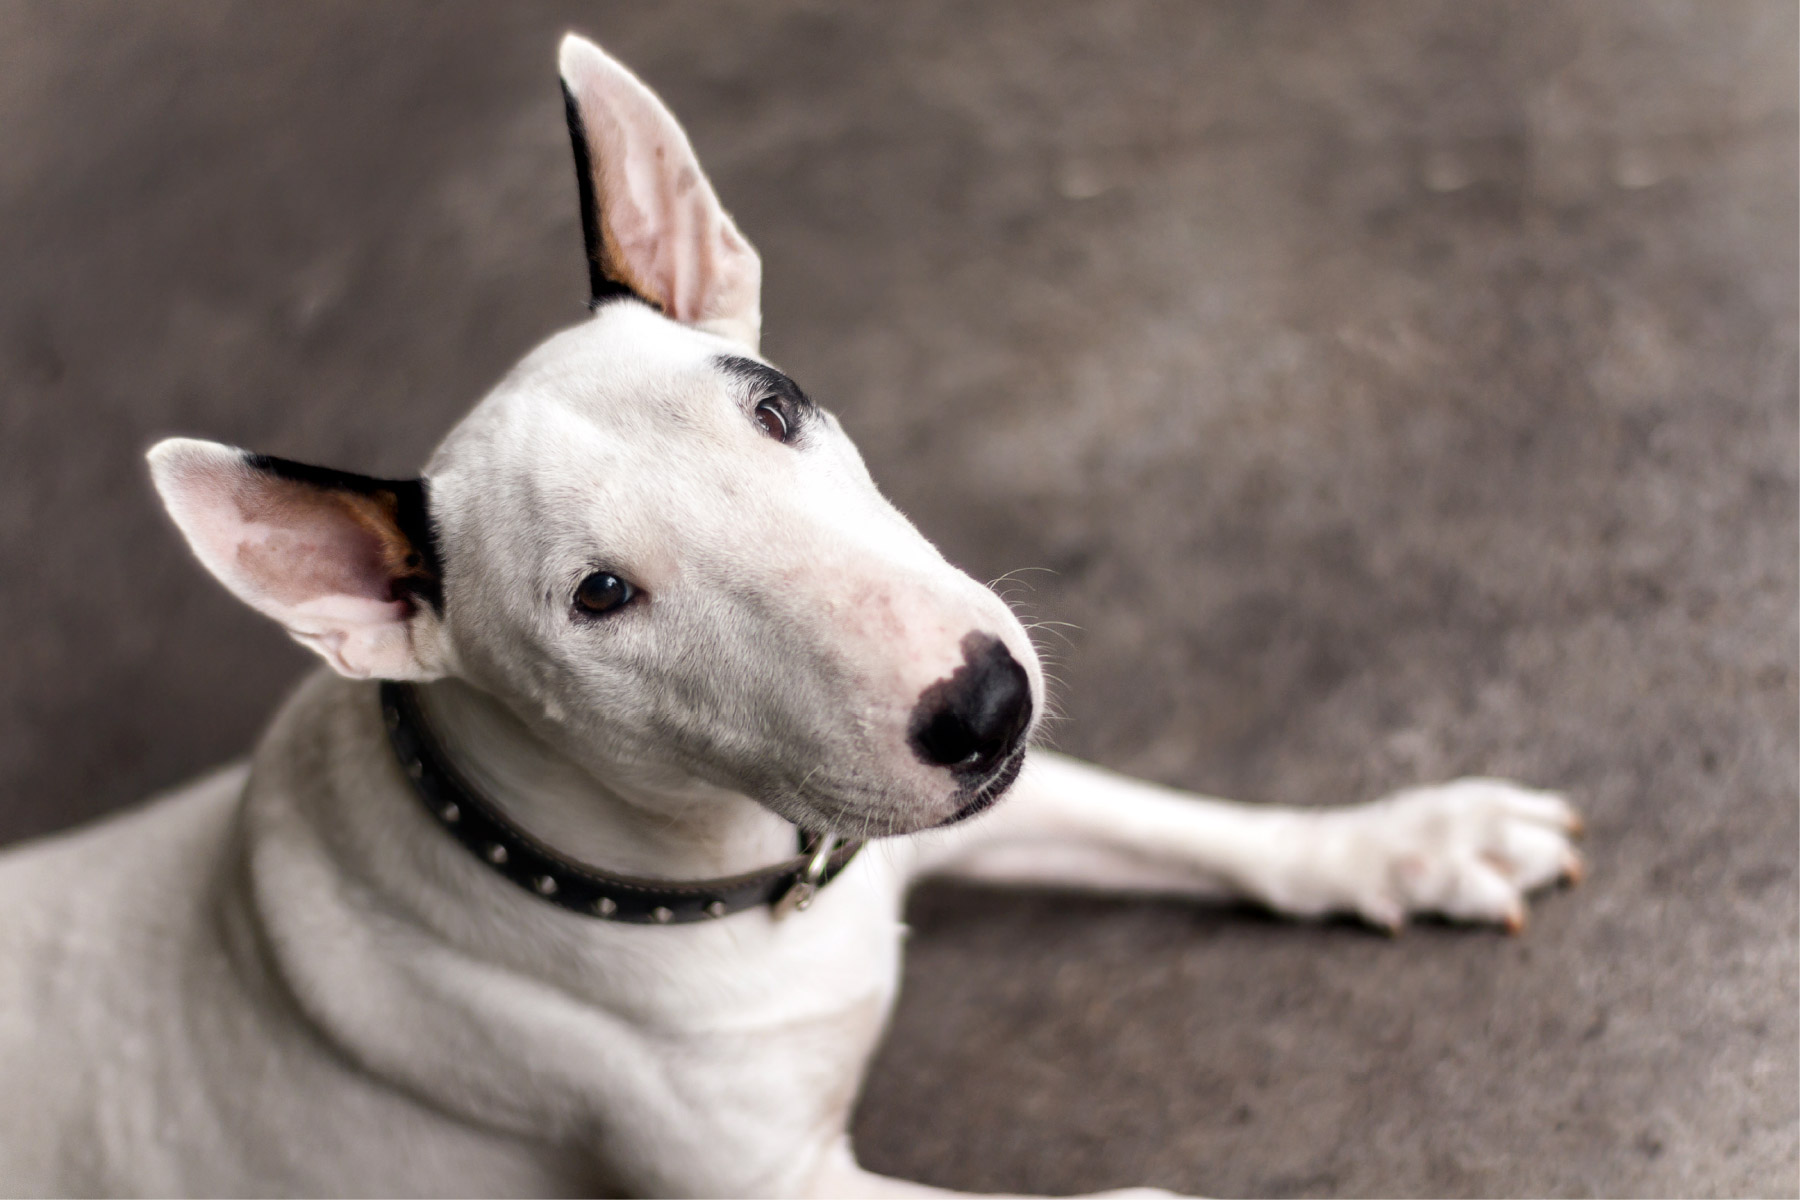 White Bull Terrier Looking up at camera